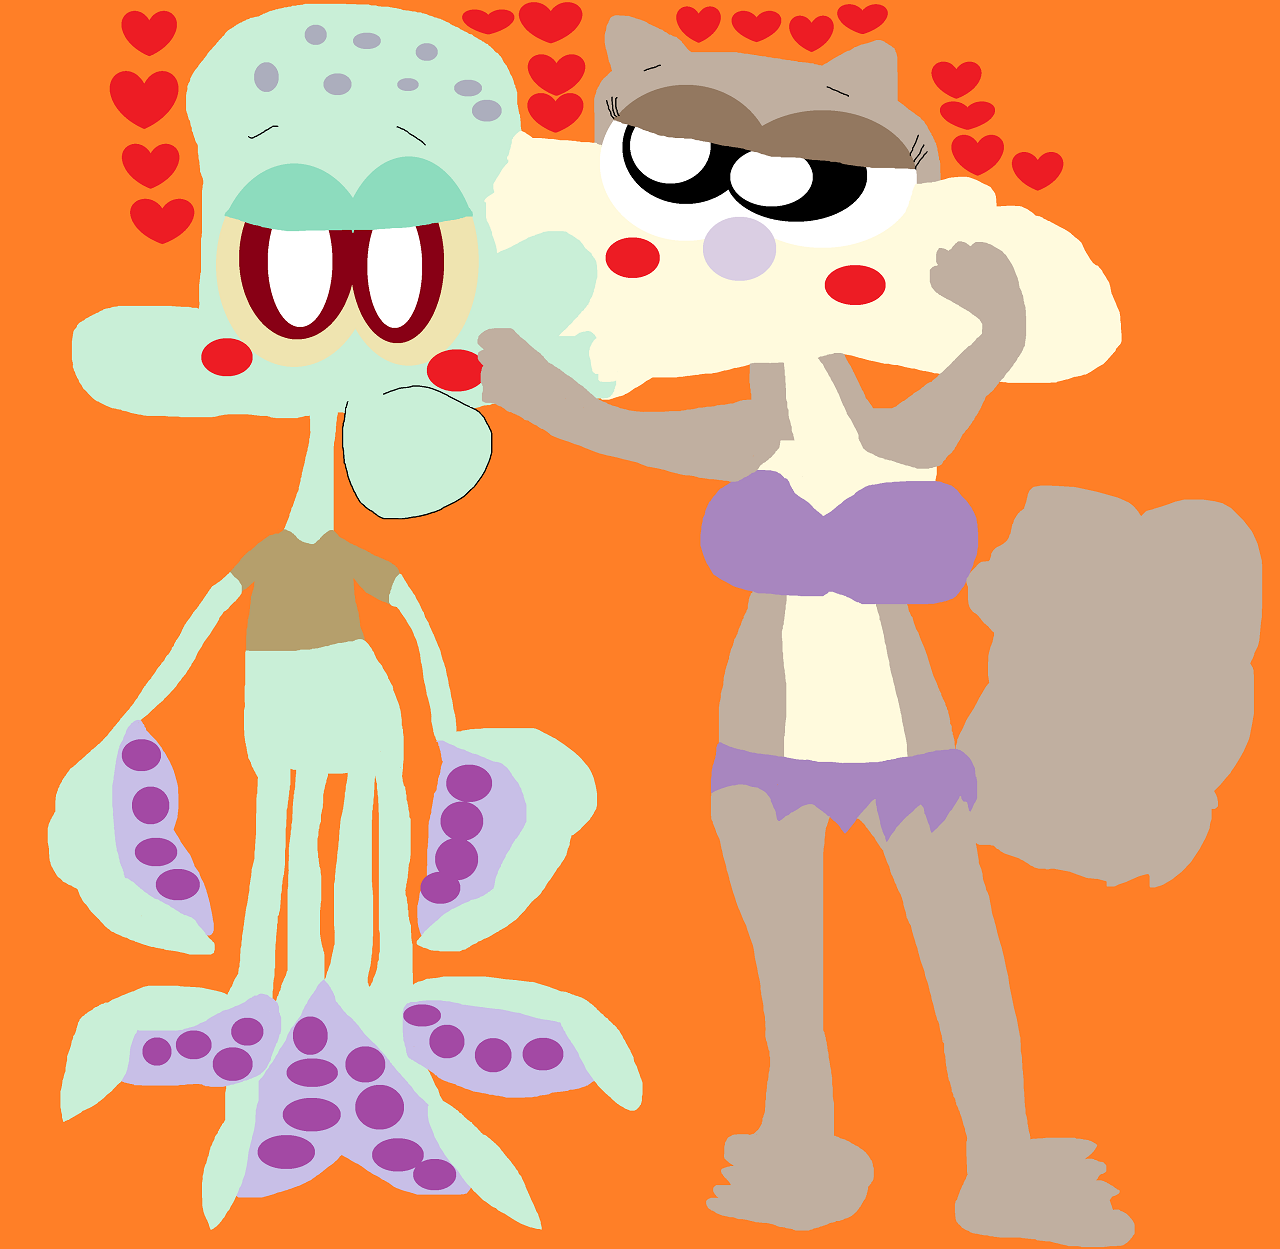 Just Another Random Squidward And Sandy Kissing by Falconlobo